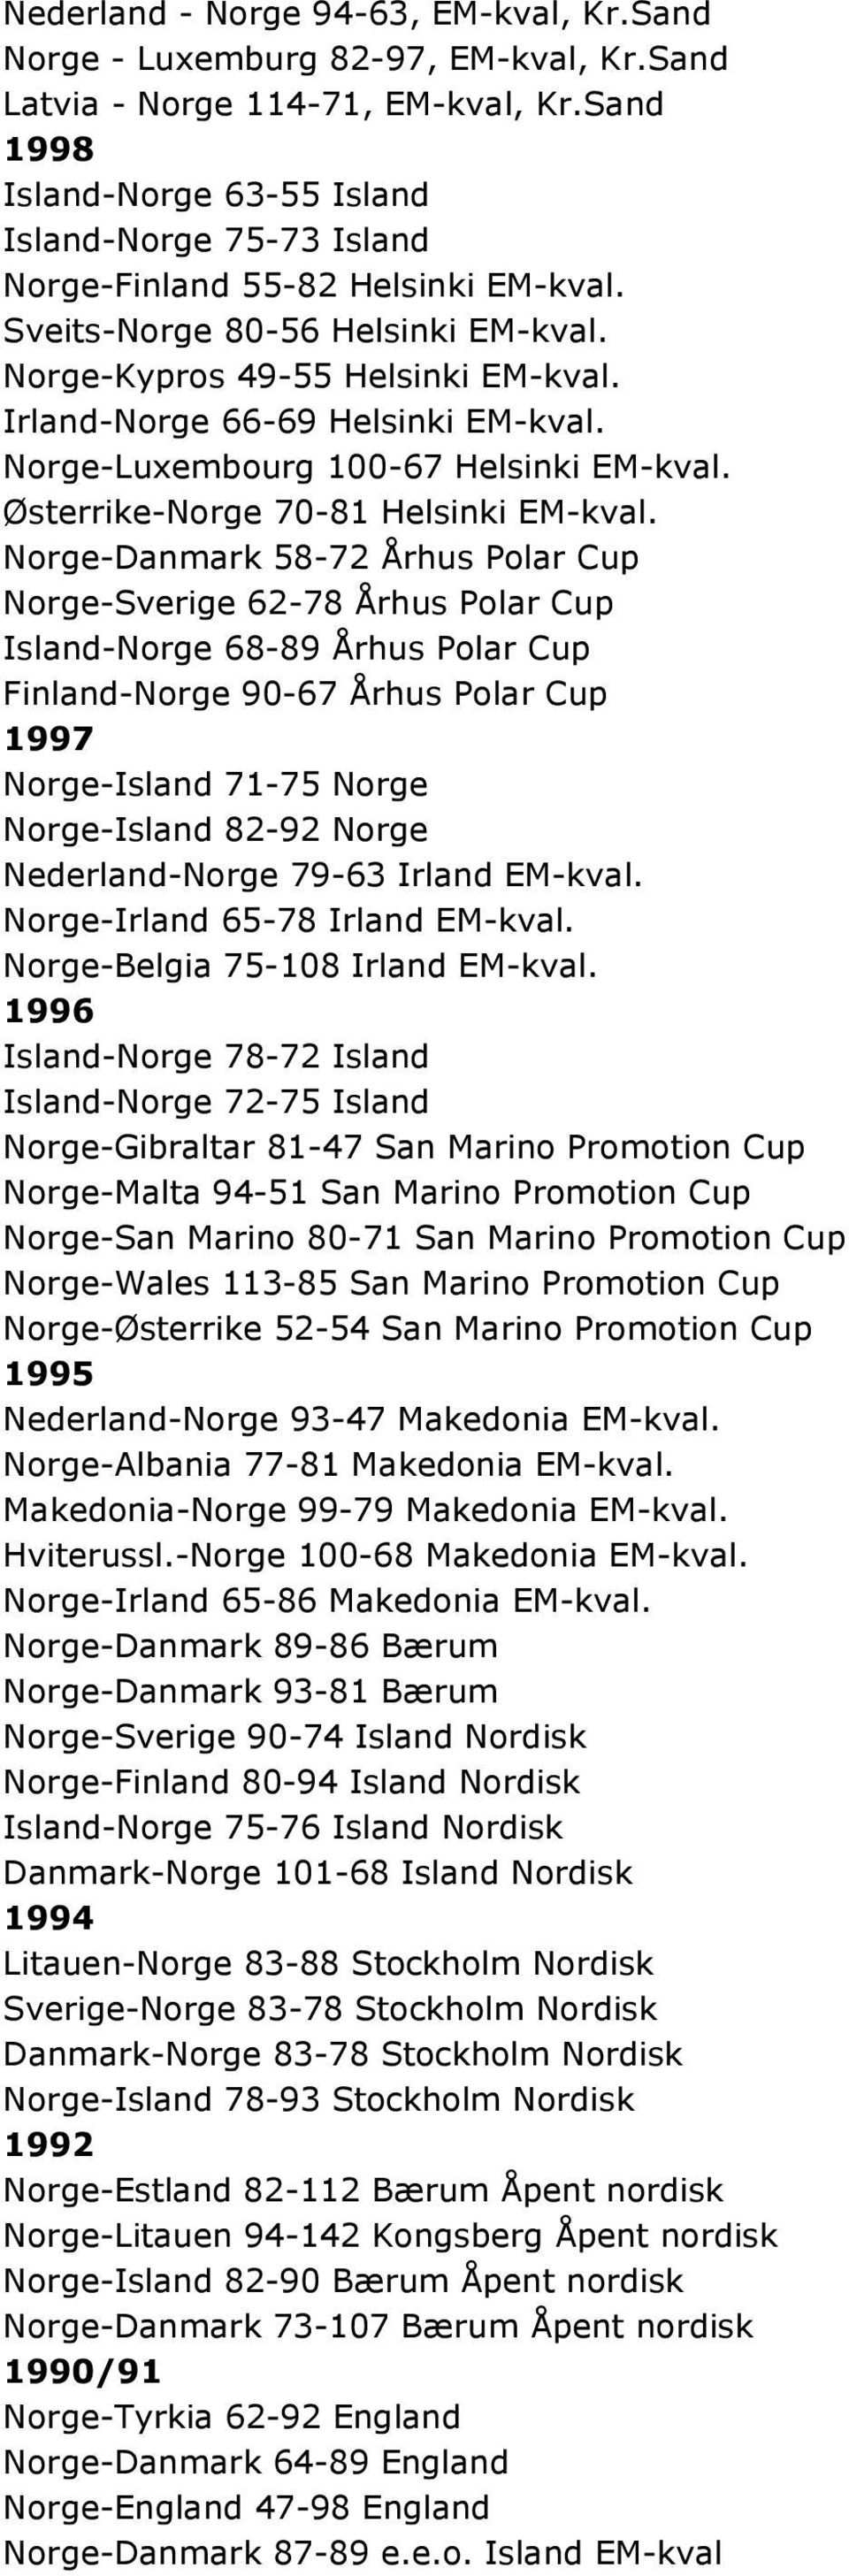 Irland-Norge 66-69 Helsinki EM-kval. Norge-Luxembourg 100-67 Helsinki EM-kval. Østerrike-Norge 70-81 Helsinki EM-kval.